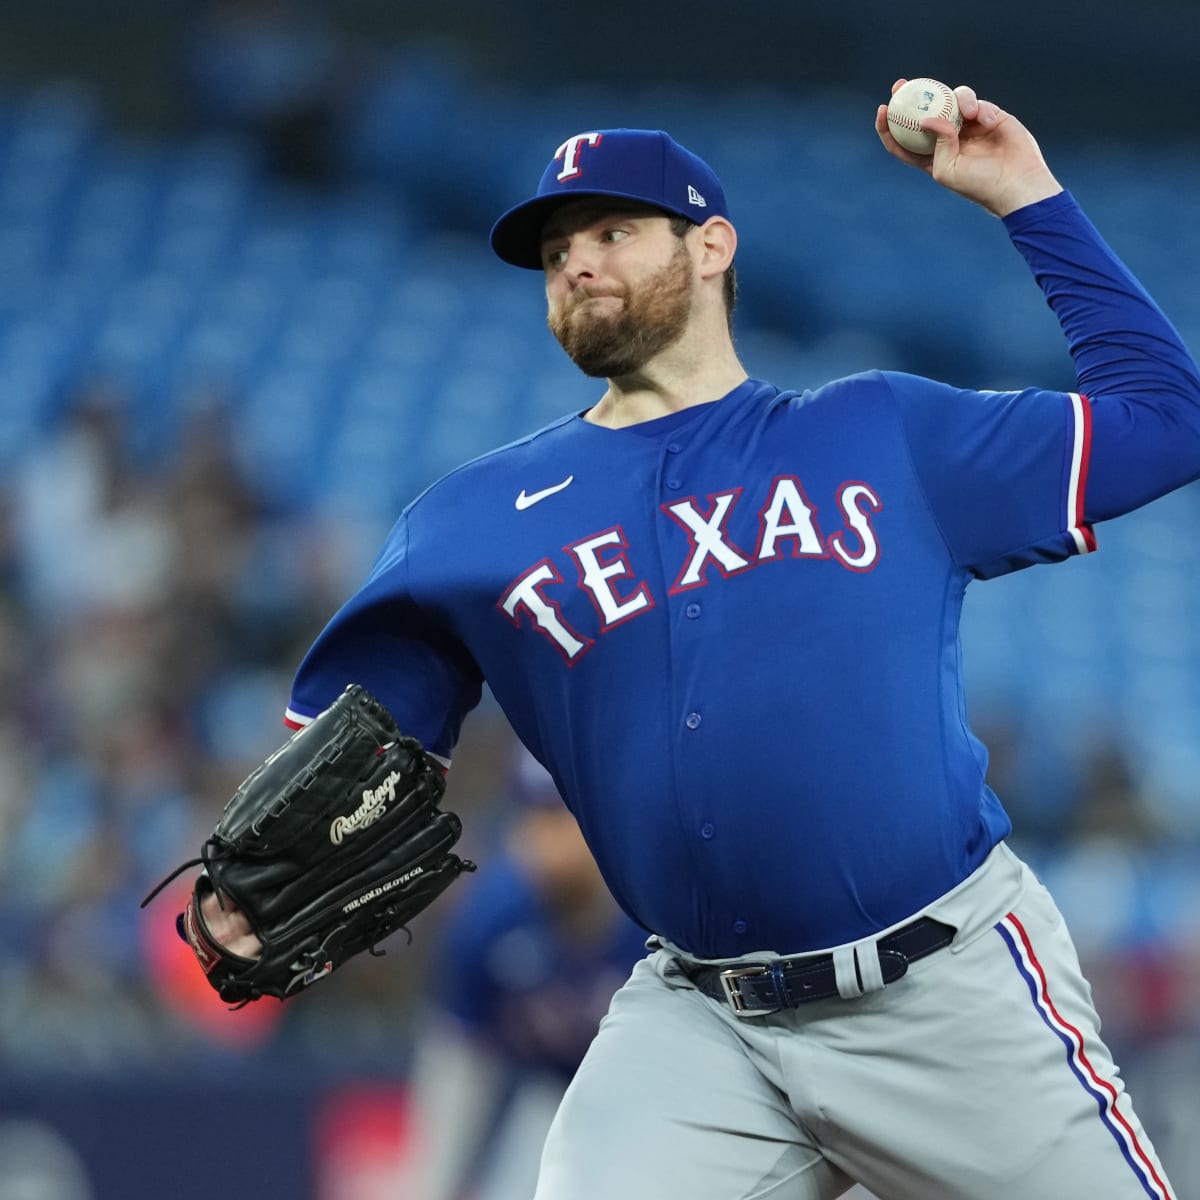 Texas Rangers have 5 All-Star starters after García added along with  Baltimore's Hays - NBC Sports